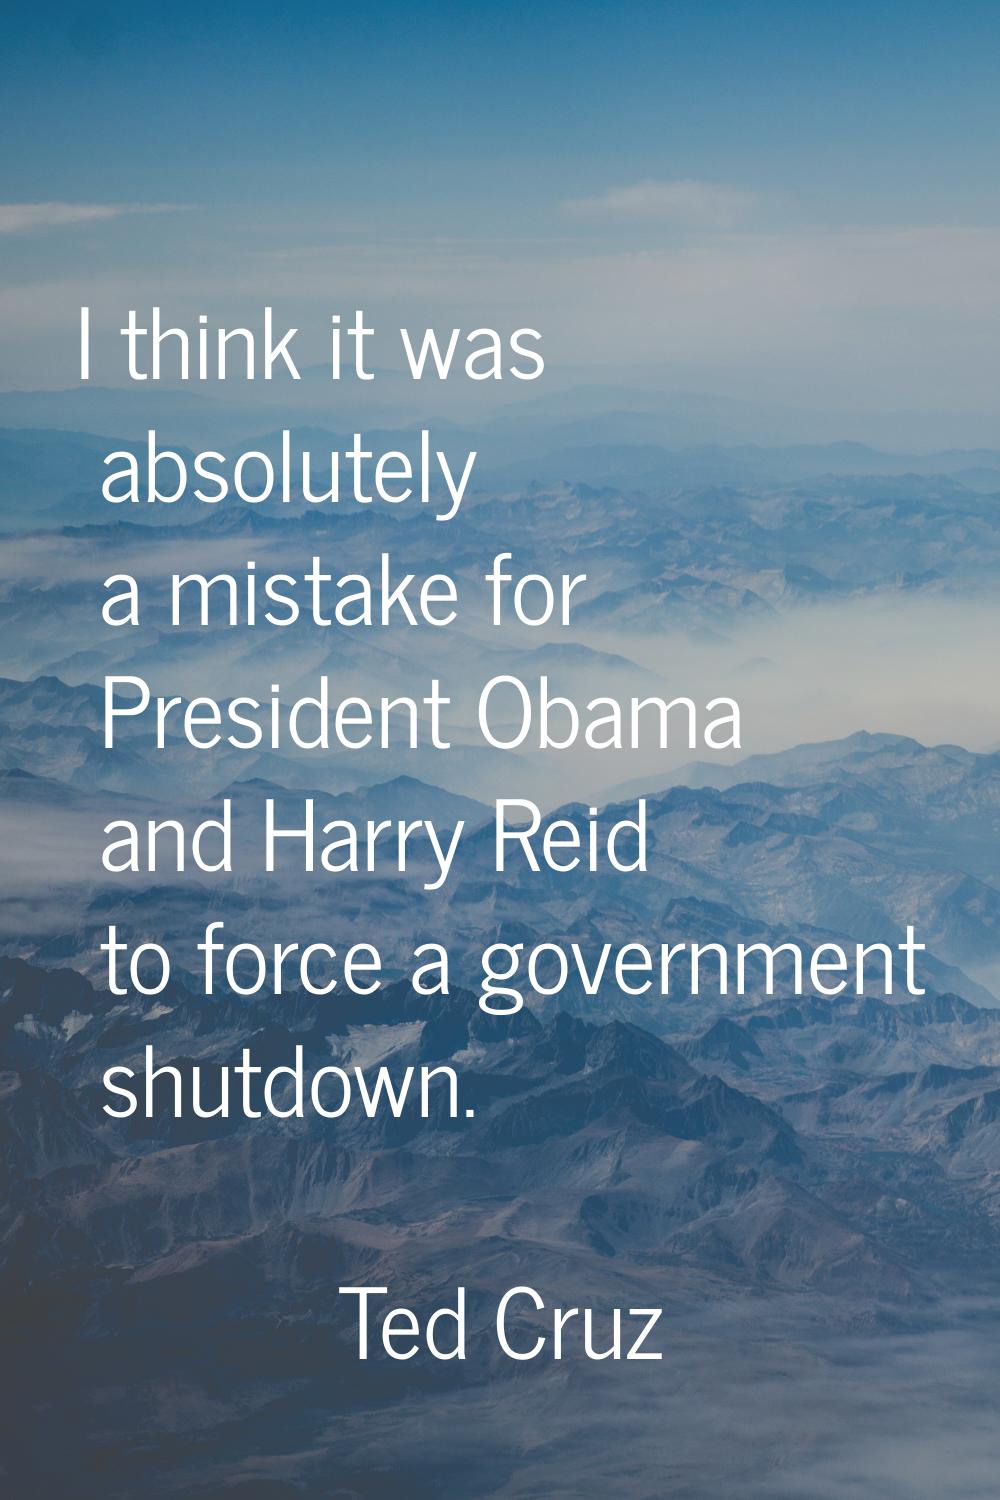 I think it was absolutely a mistake for President Obama and Harry Reid to force a government shutdo